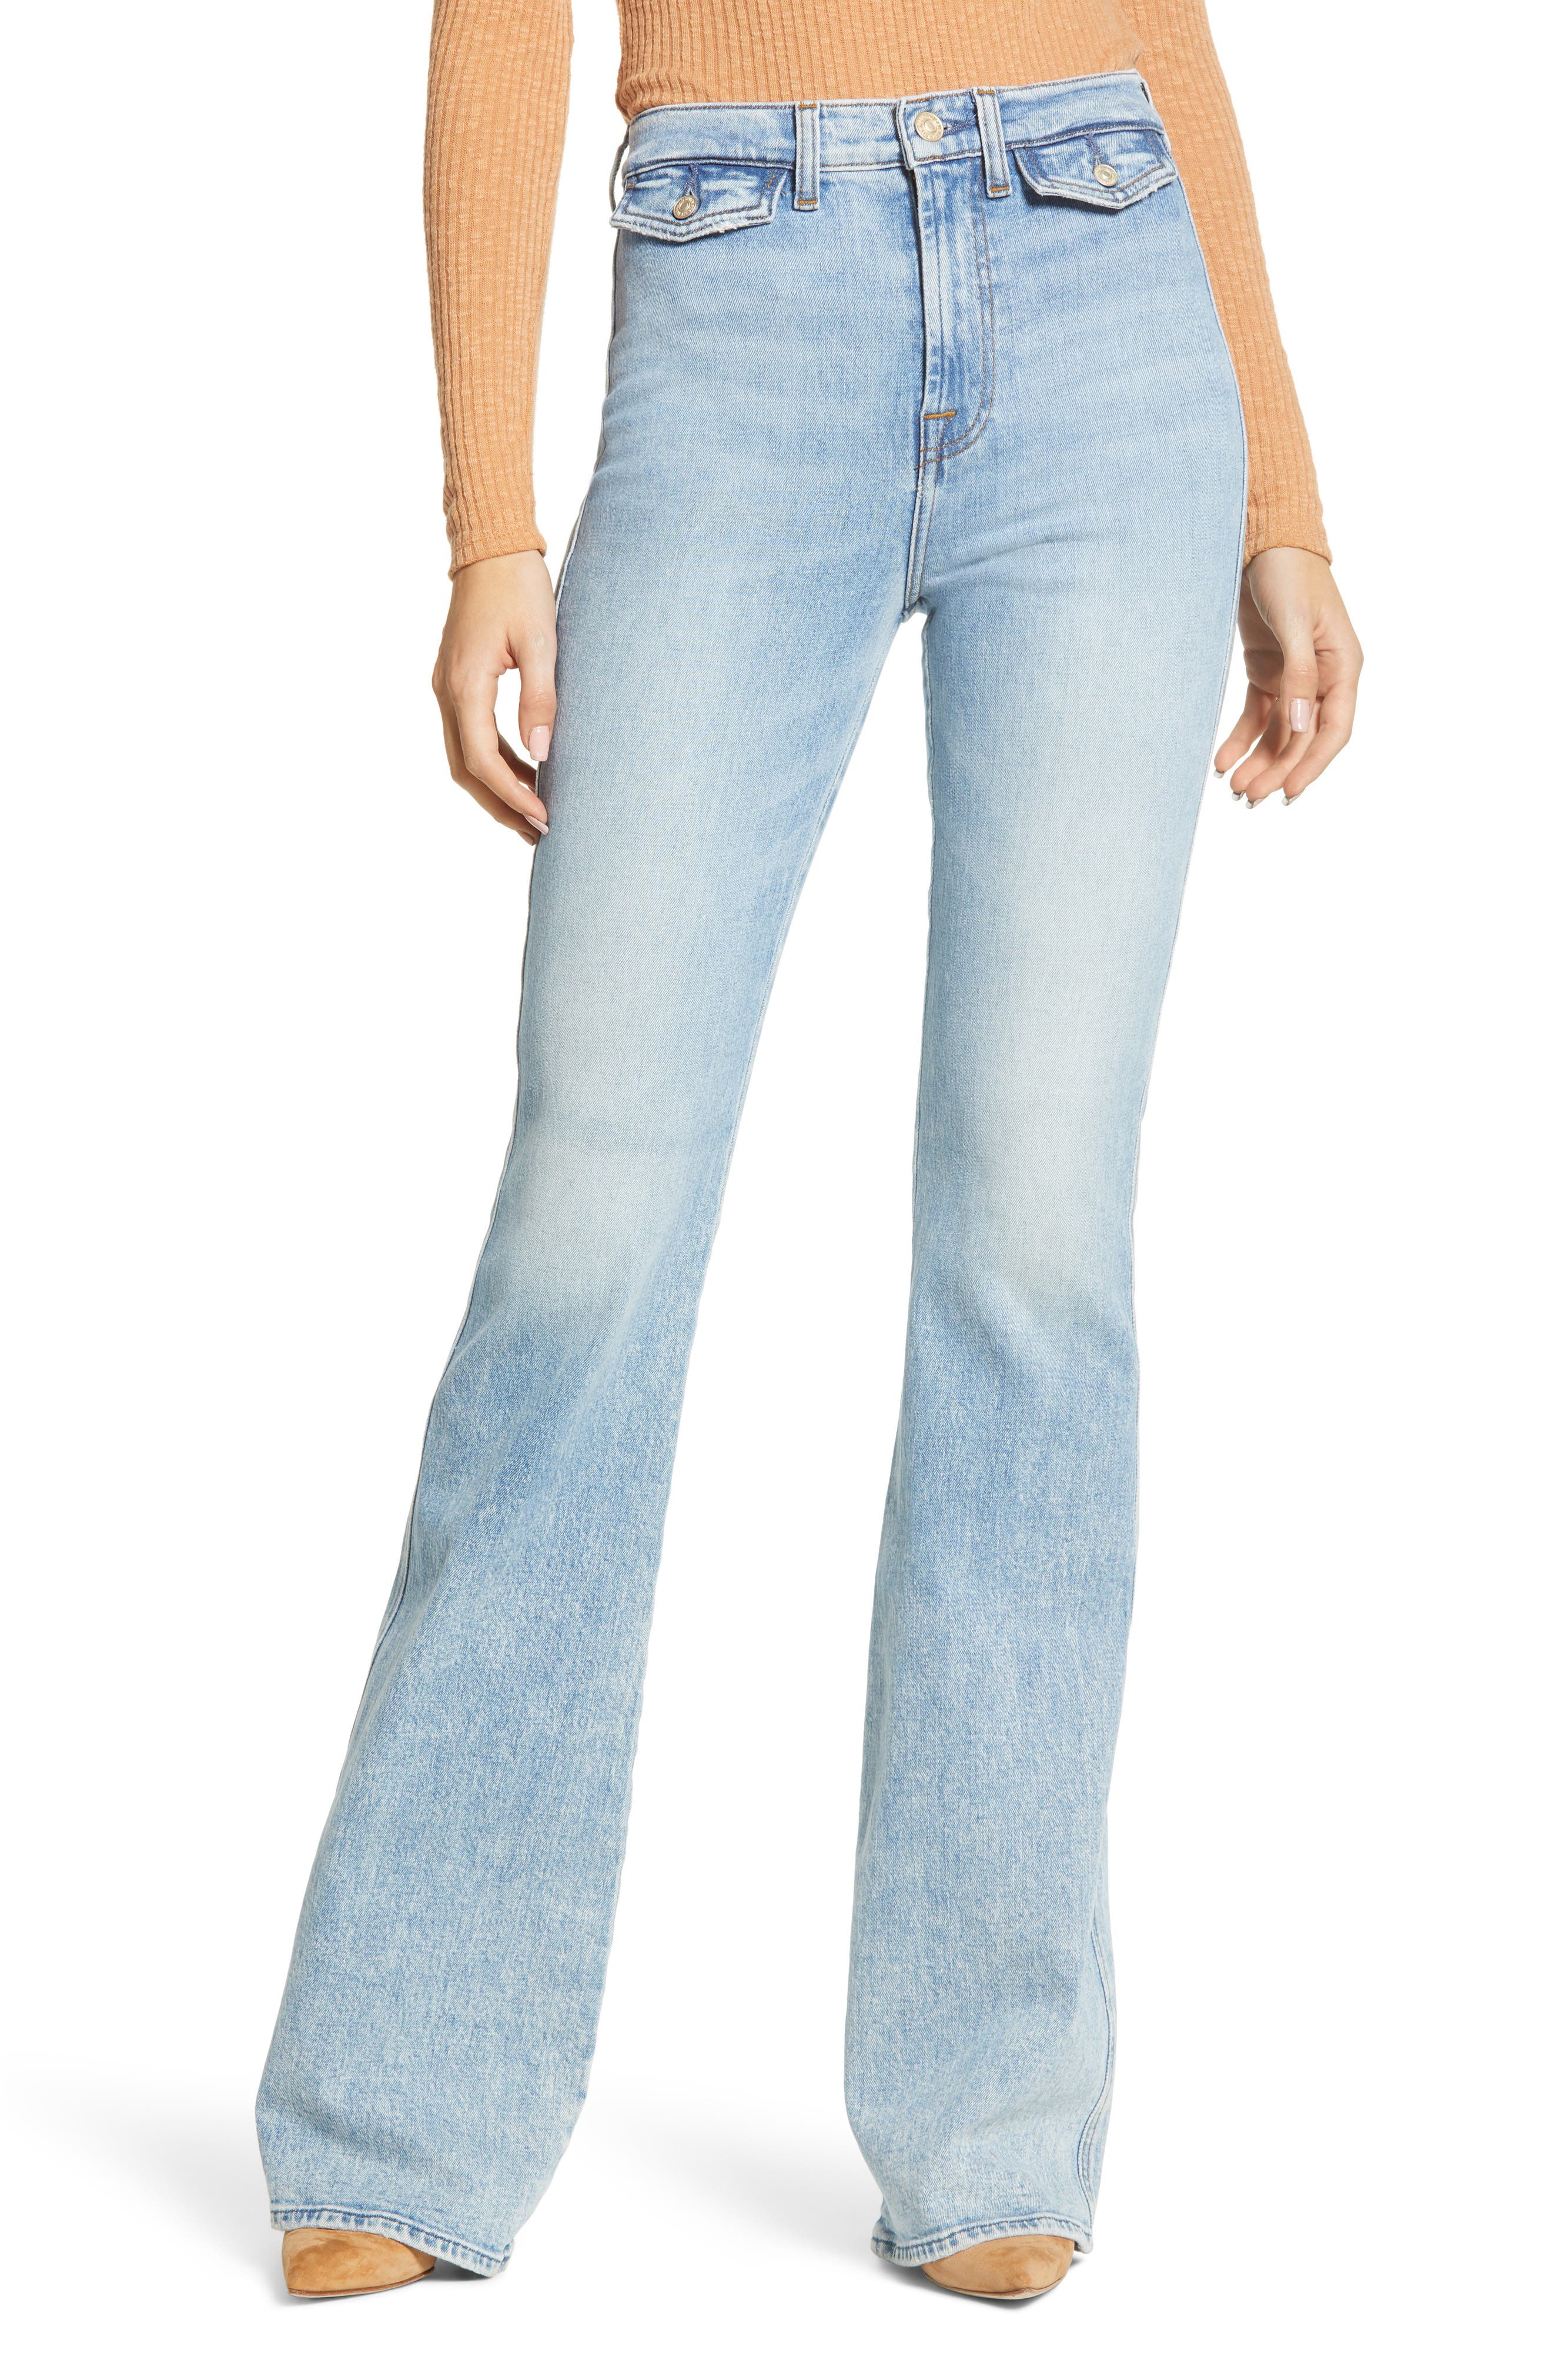 nordstrom 7 for all mankind